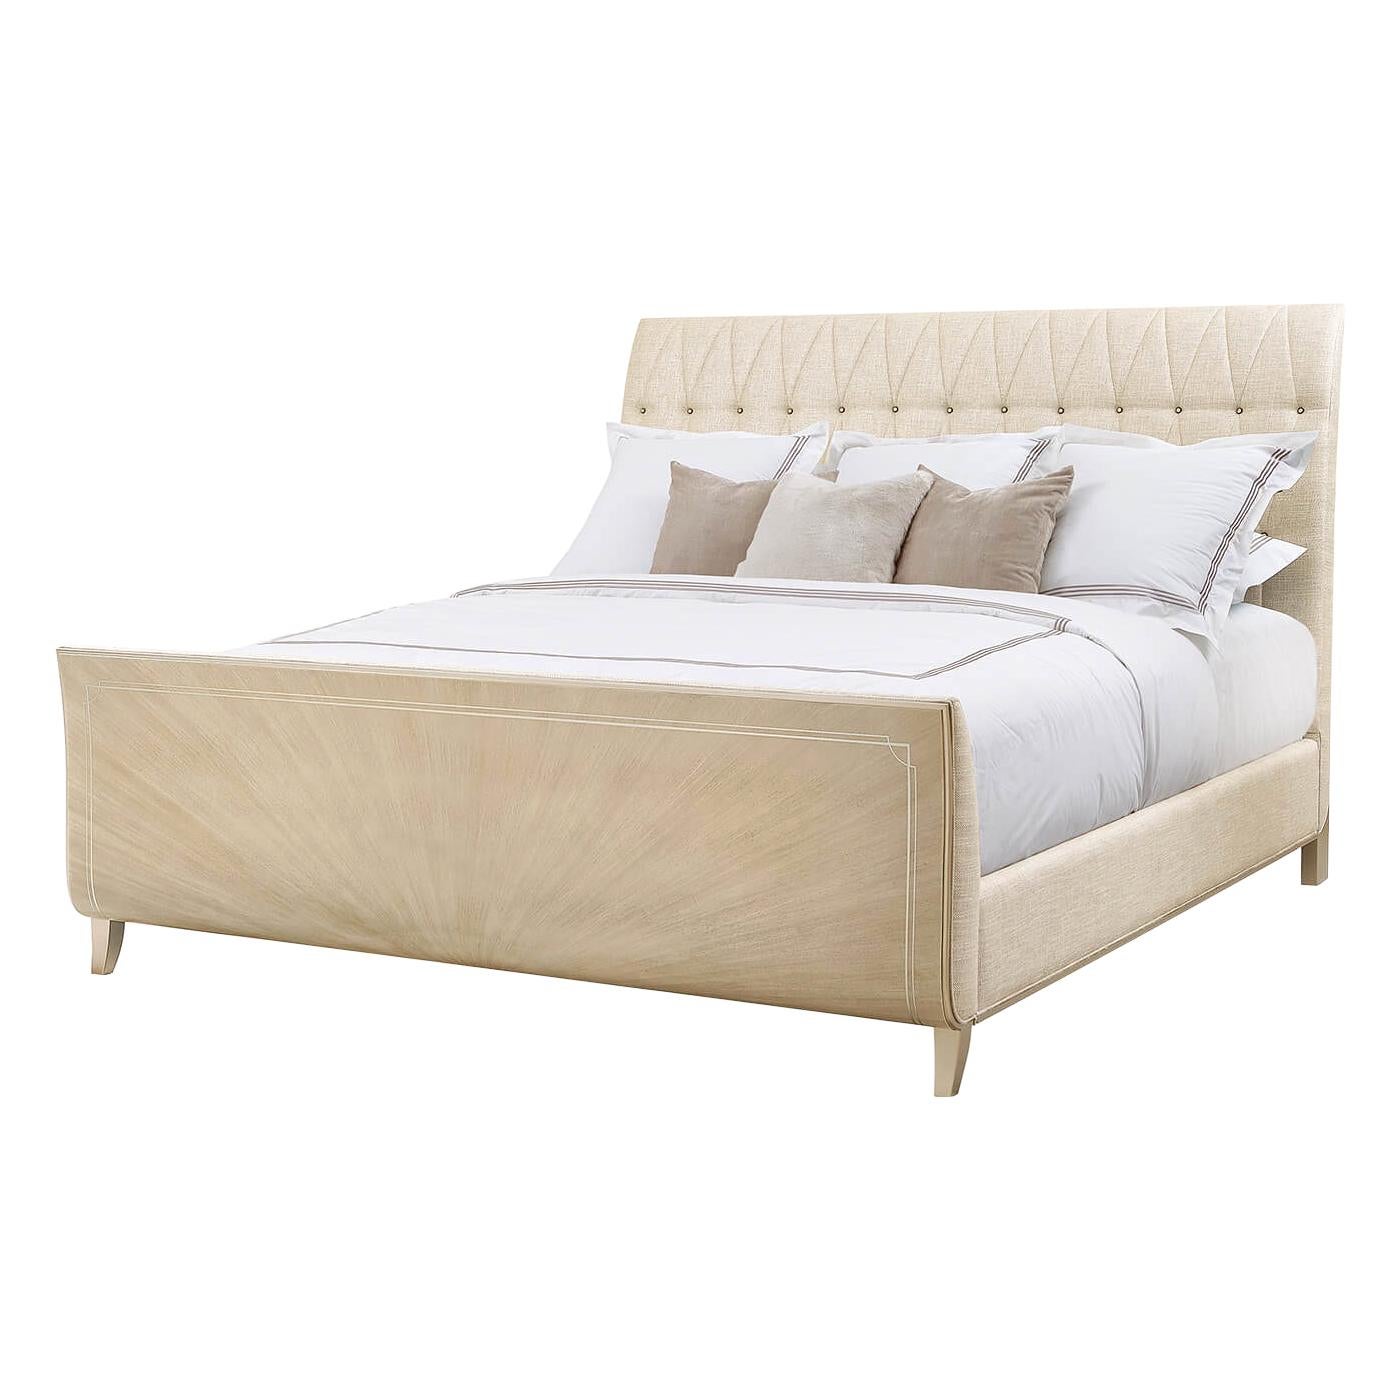 Art Deco Sleigh Bed King